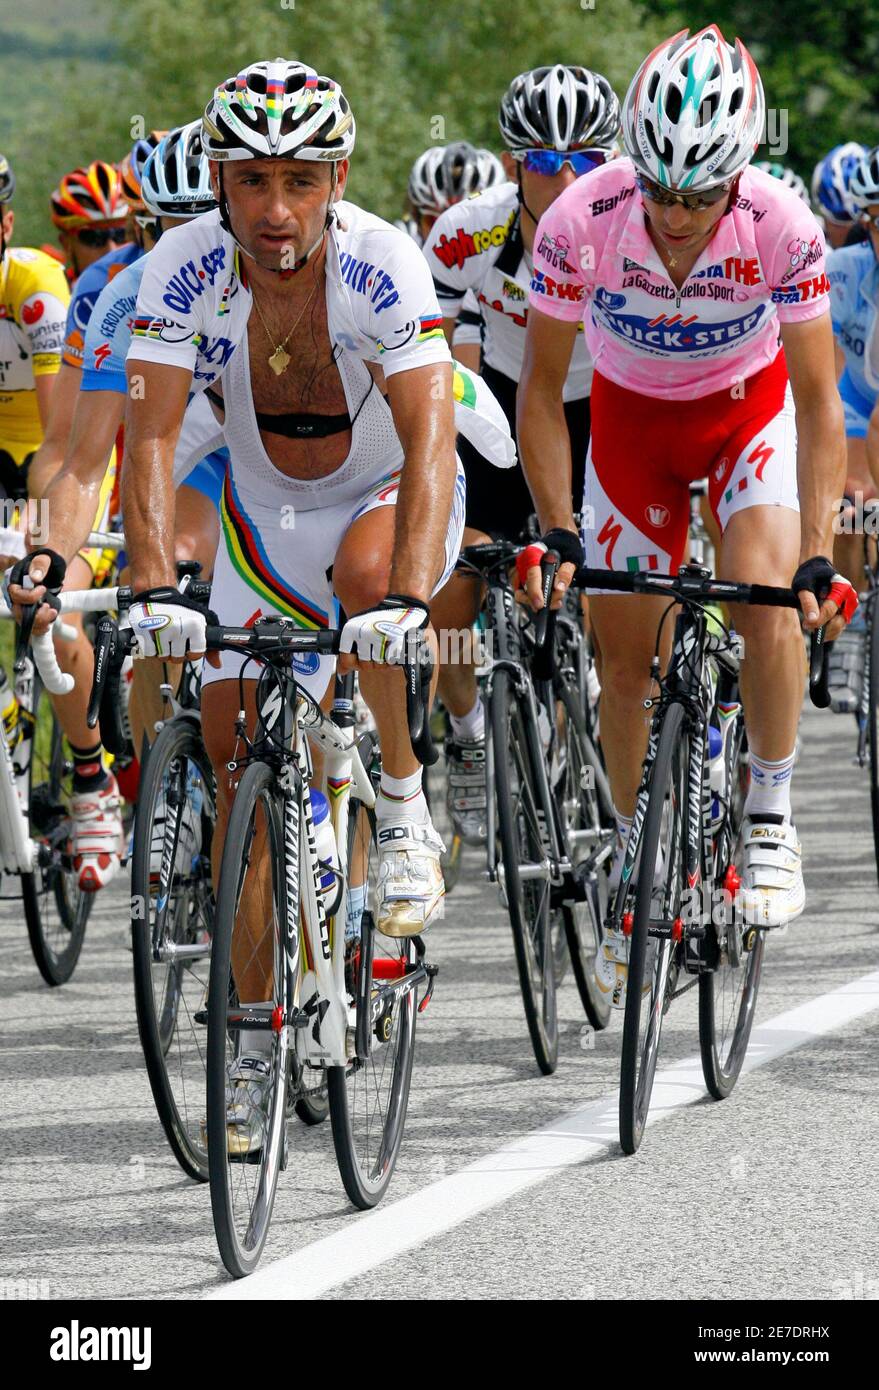 Italy's Giovanni Visconti (R), wearing the leader's pink jersey, cycles near his compatriot world champion Paolo Bettini during the seventh stage of the 176-km Giro d'Italia cycling race from Vasto to Pescocostanzo May 16, 2008.  REUTERS/Giampiero Sposito (ITALY) Stock Photo